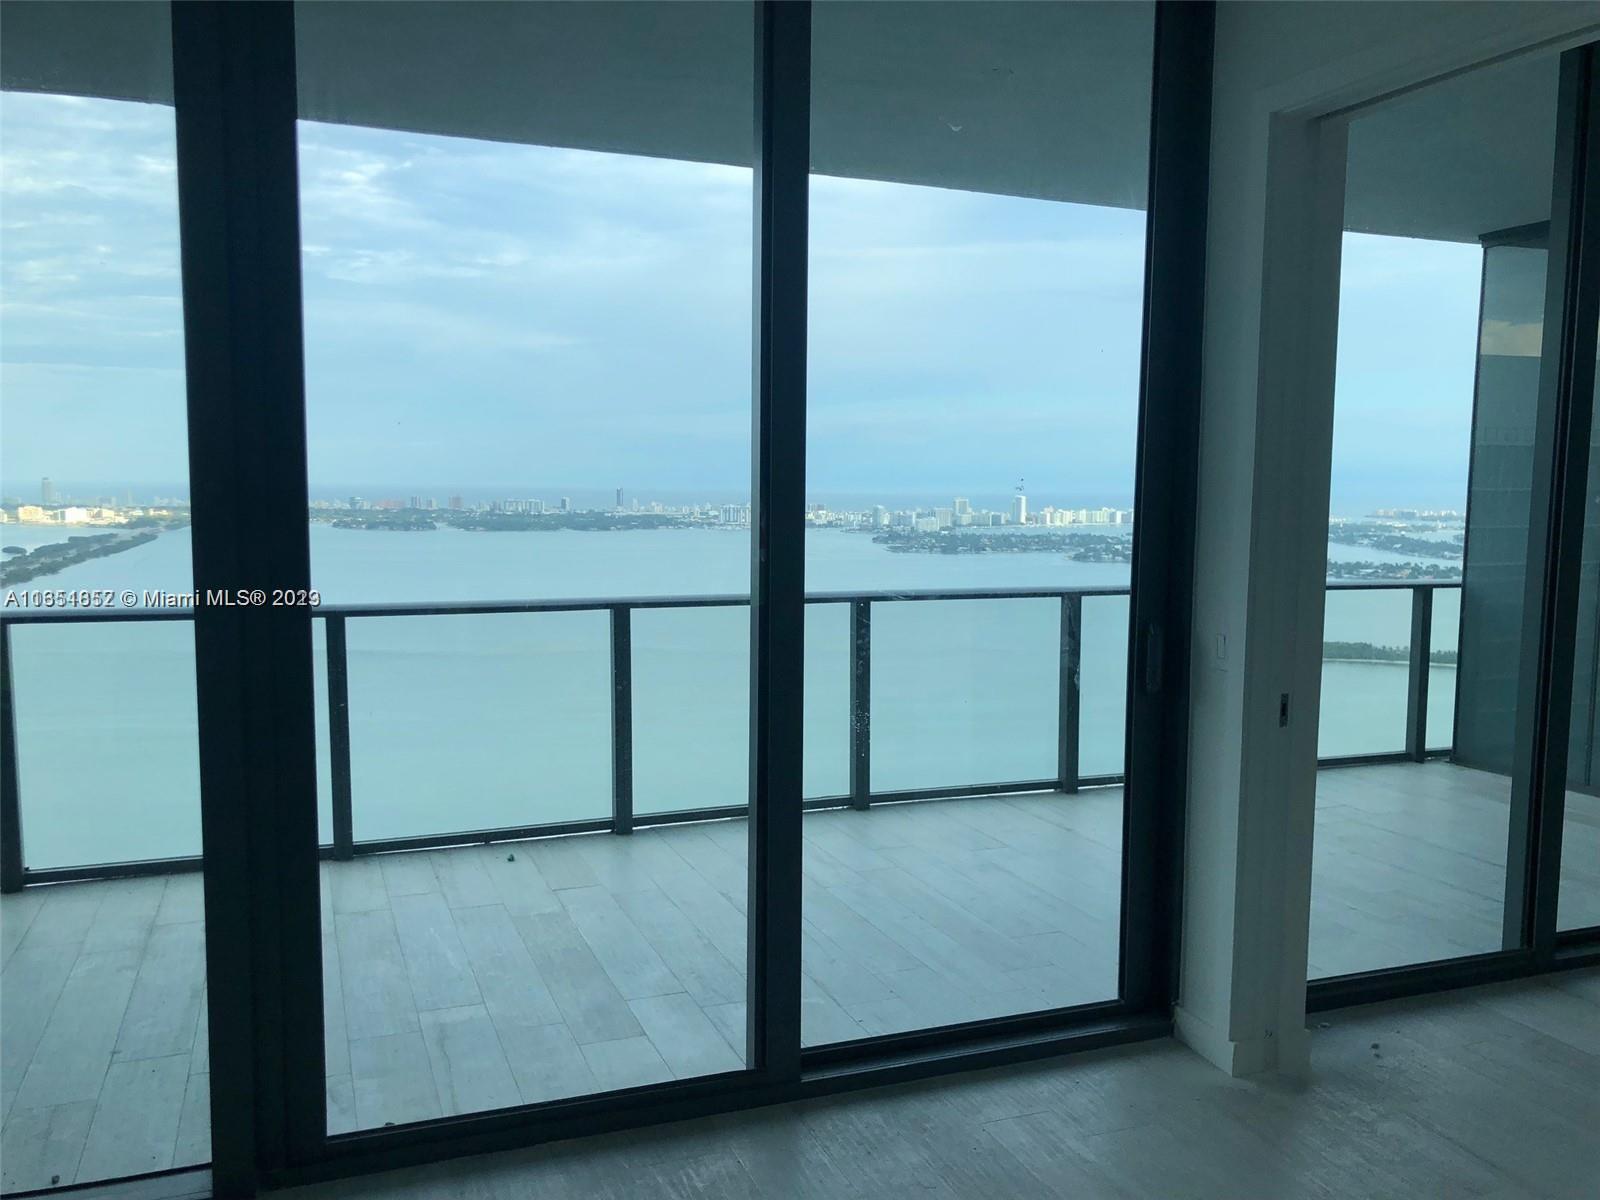 This amazing view apartment offers stunning views of the sea, with beautiful sunsets, and plenty of 